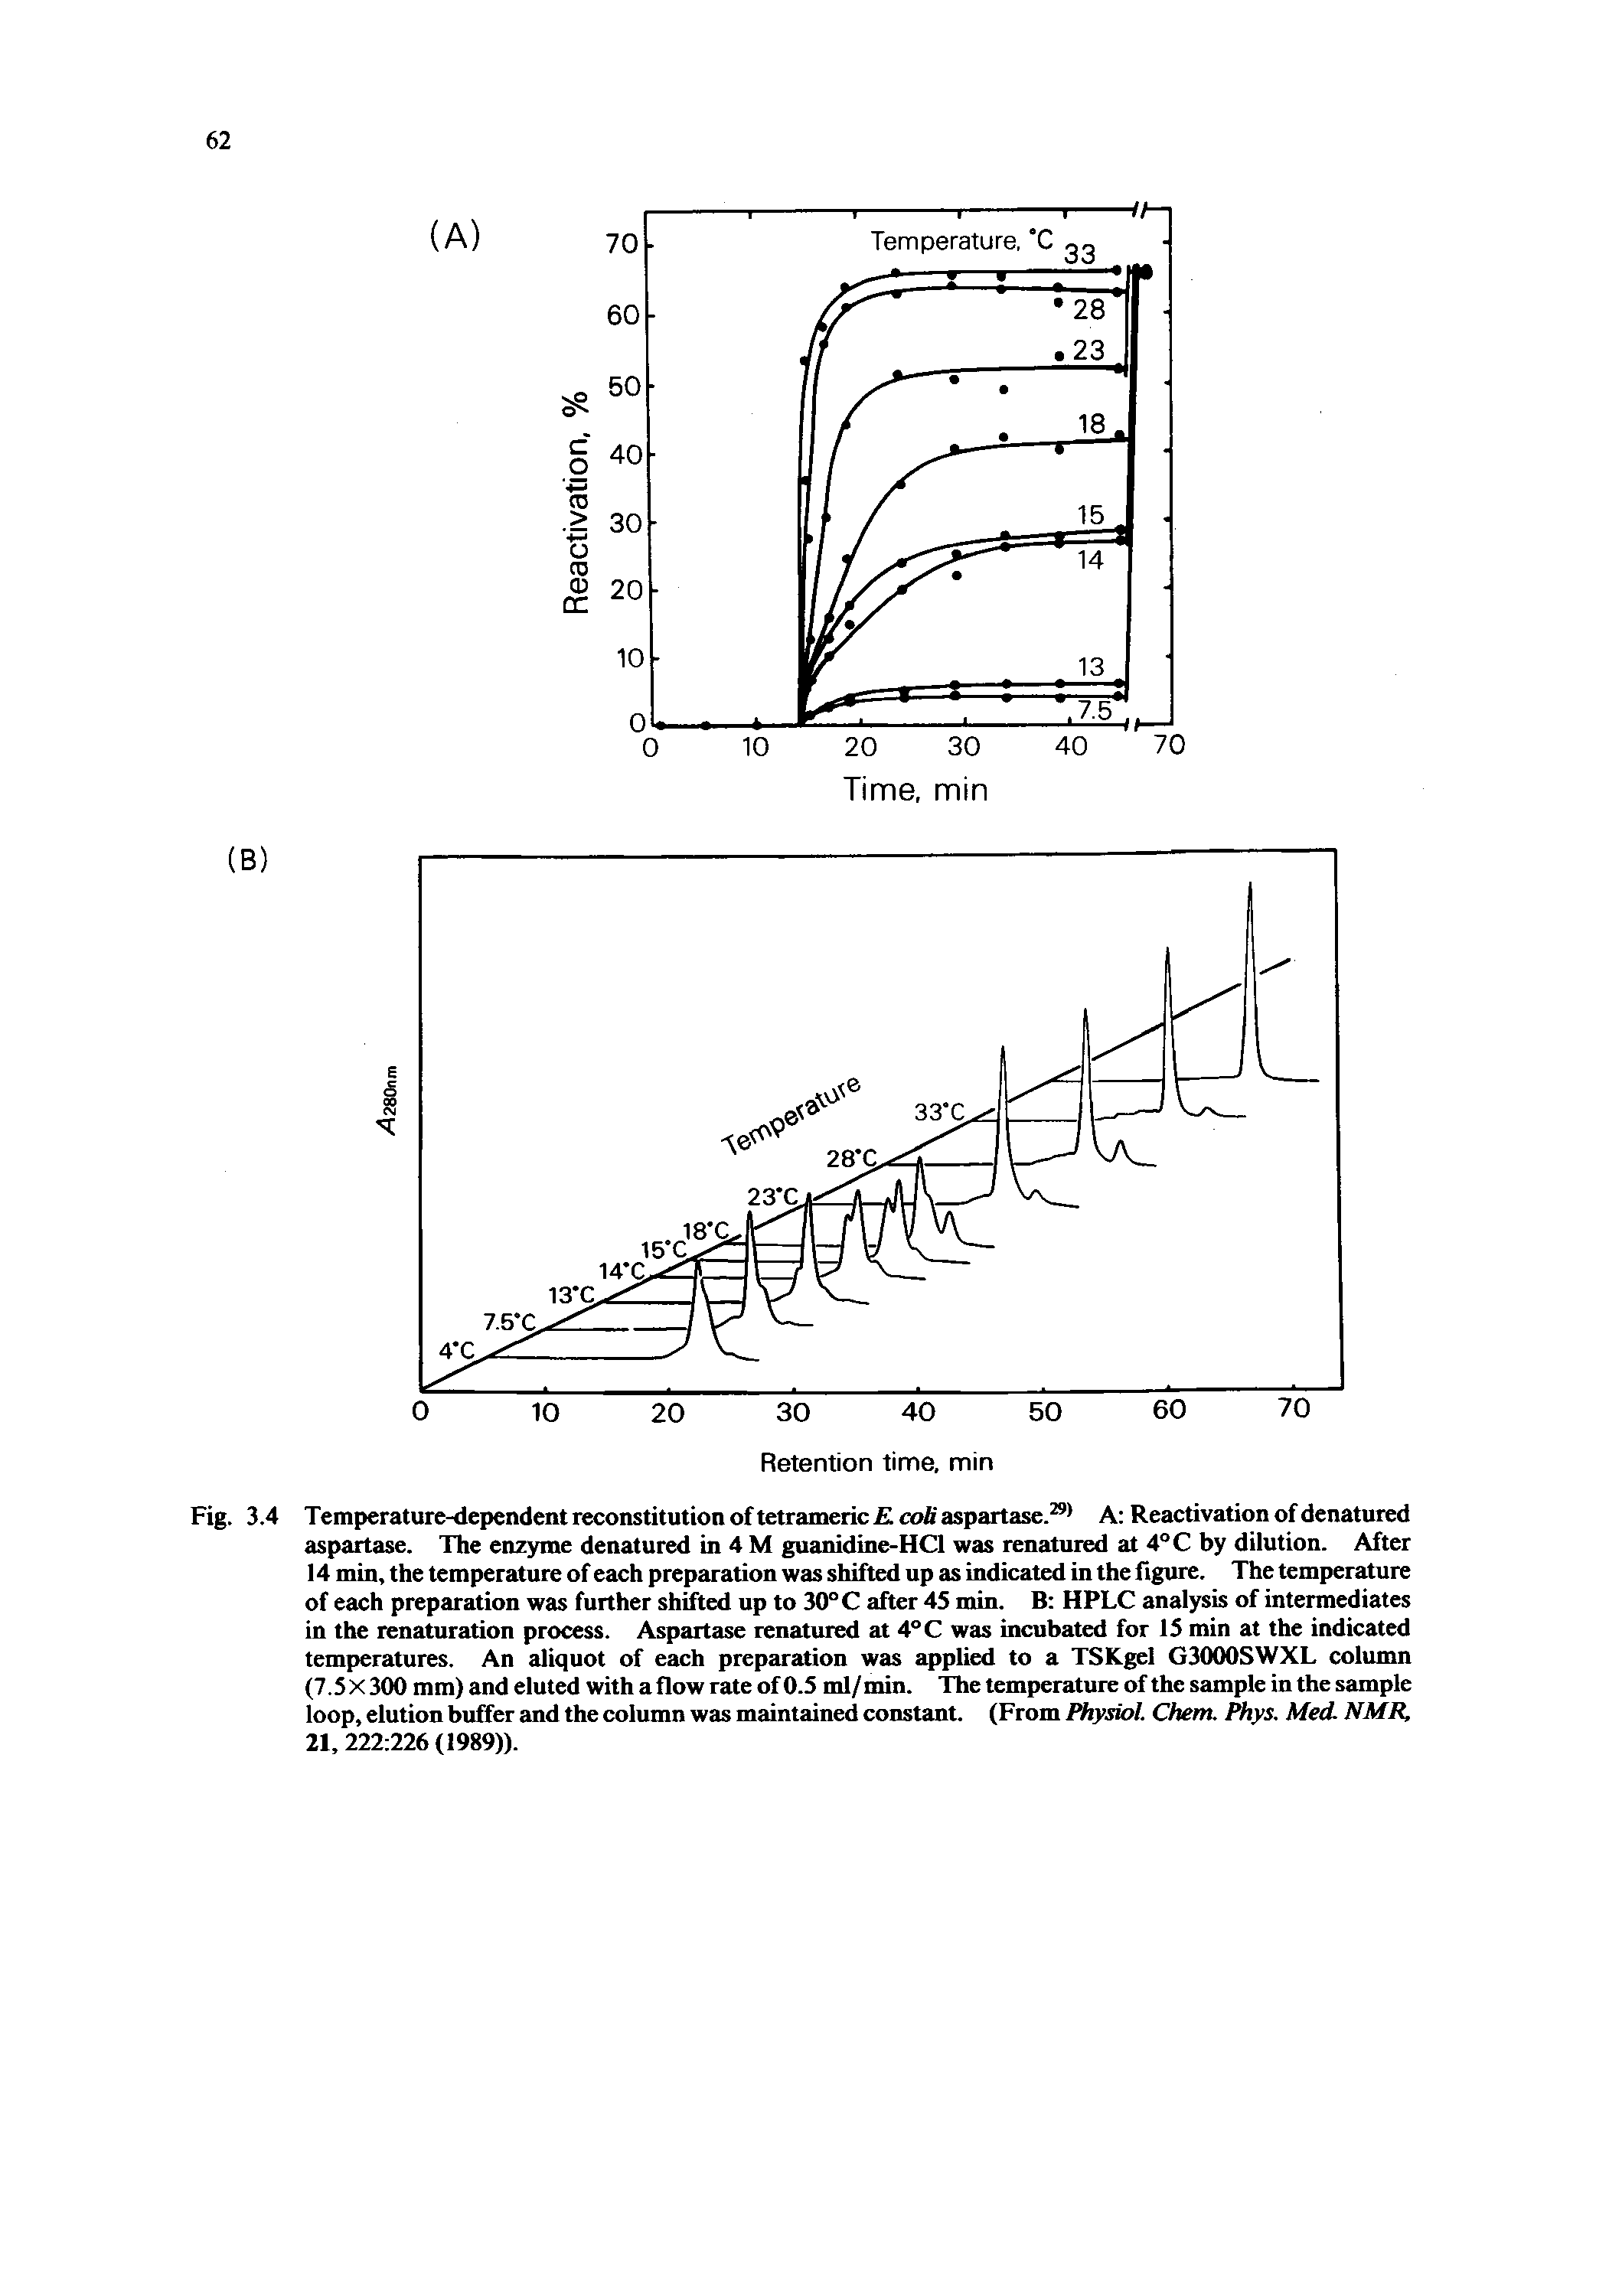 Fig. 3.4 Temperature-dependent reconstitution of tetrameric K coli aspartase.29 A Reactivation of denatured aspartase. The enzyme denatured in 4 M guanidine-HCl was renatured at 4° C by dilution. After 14 min, the temperature of each preparation was shifted up as indicated in the figure. The temperature of each preparation was further shifted up to 30° C after 45 min. B HPLC analysis of intermediates in the renaturation process. Aspartase renatured at 4°C was incubated for 15 min at the indicated temperatures. An aliquot of each preparation was applied to a TSKgel G3000SWXL column (7.5 X 300 mm) and eluted with a flow rate of 0.5 ml/ min. The temperature of the sample in the sample loop, elution buffer and the column was maintained constant. (From Physiol Chem. Phys. Med. NMR, 21, 222 226 (1989)).